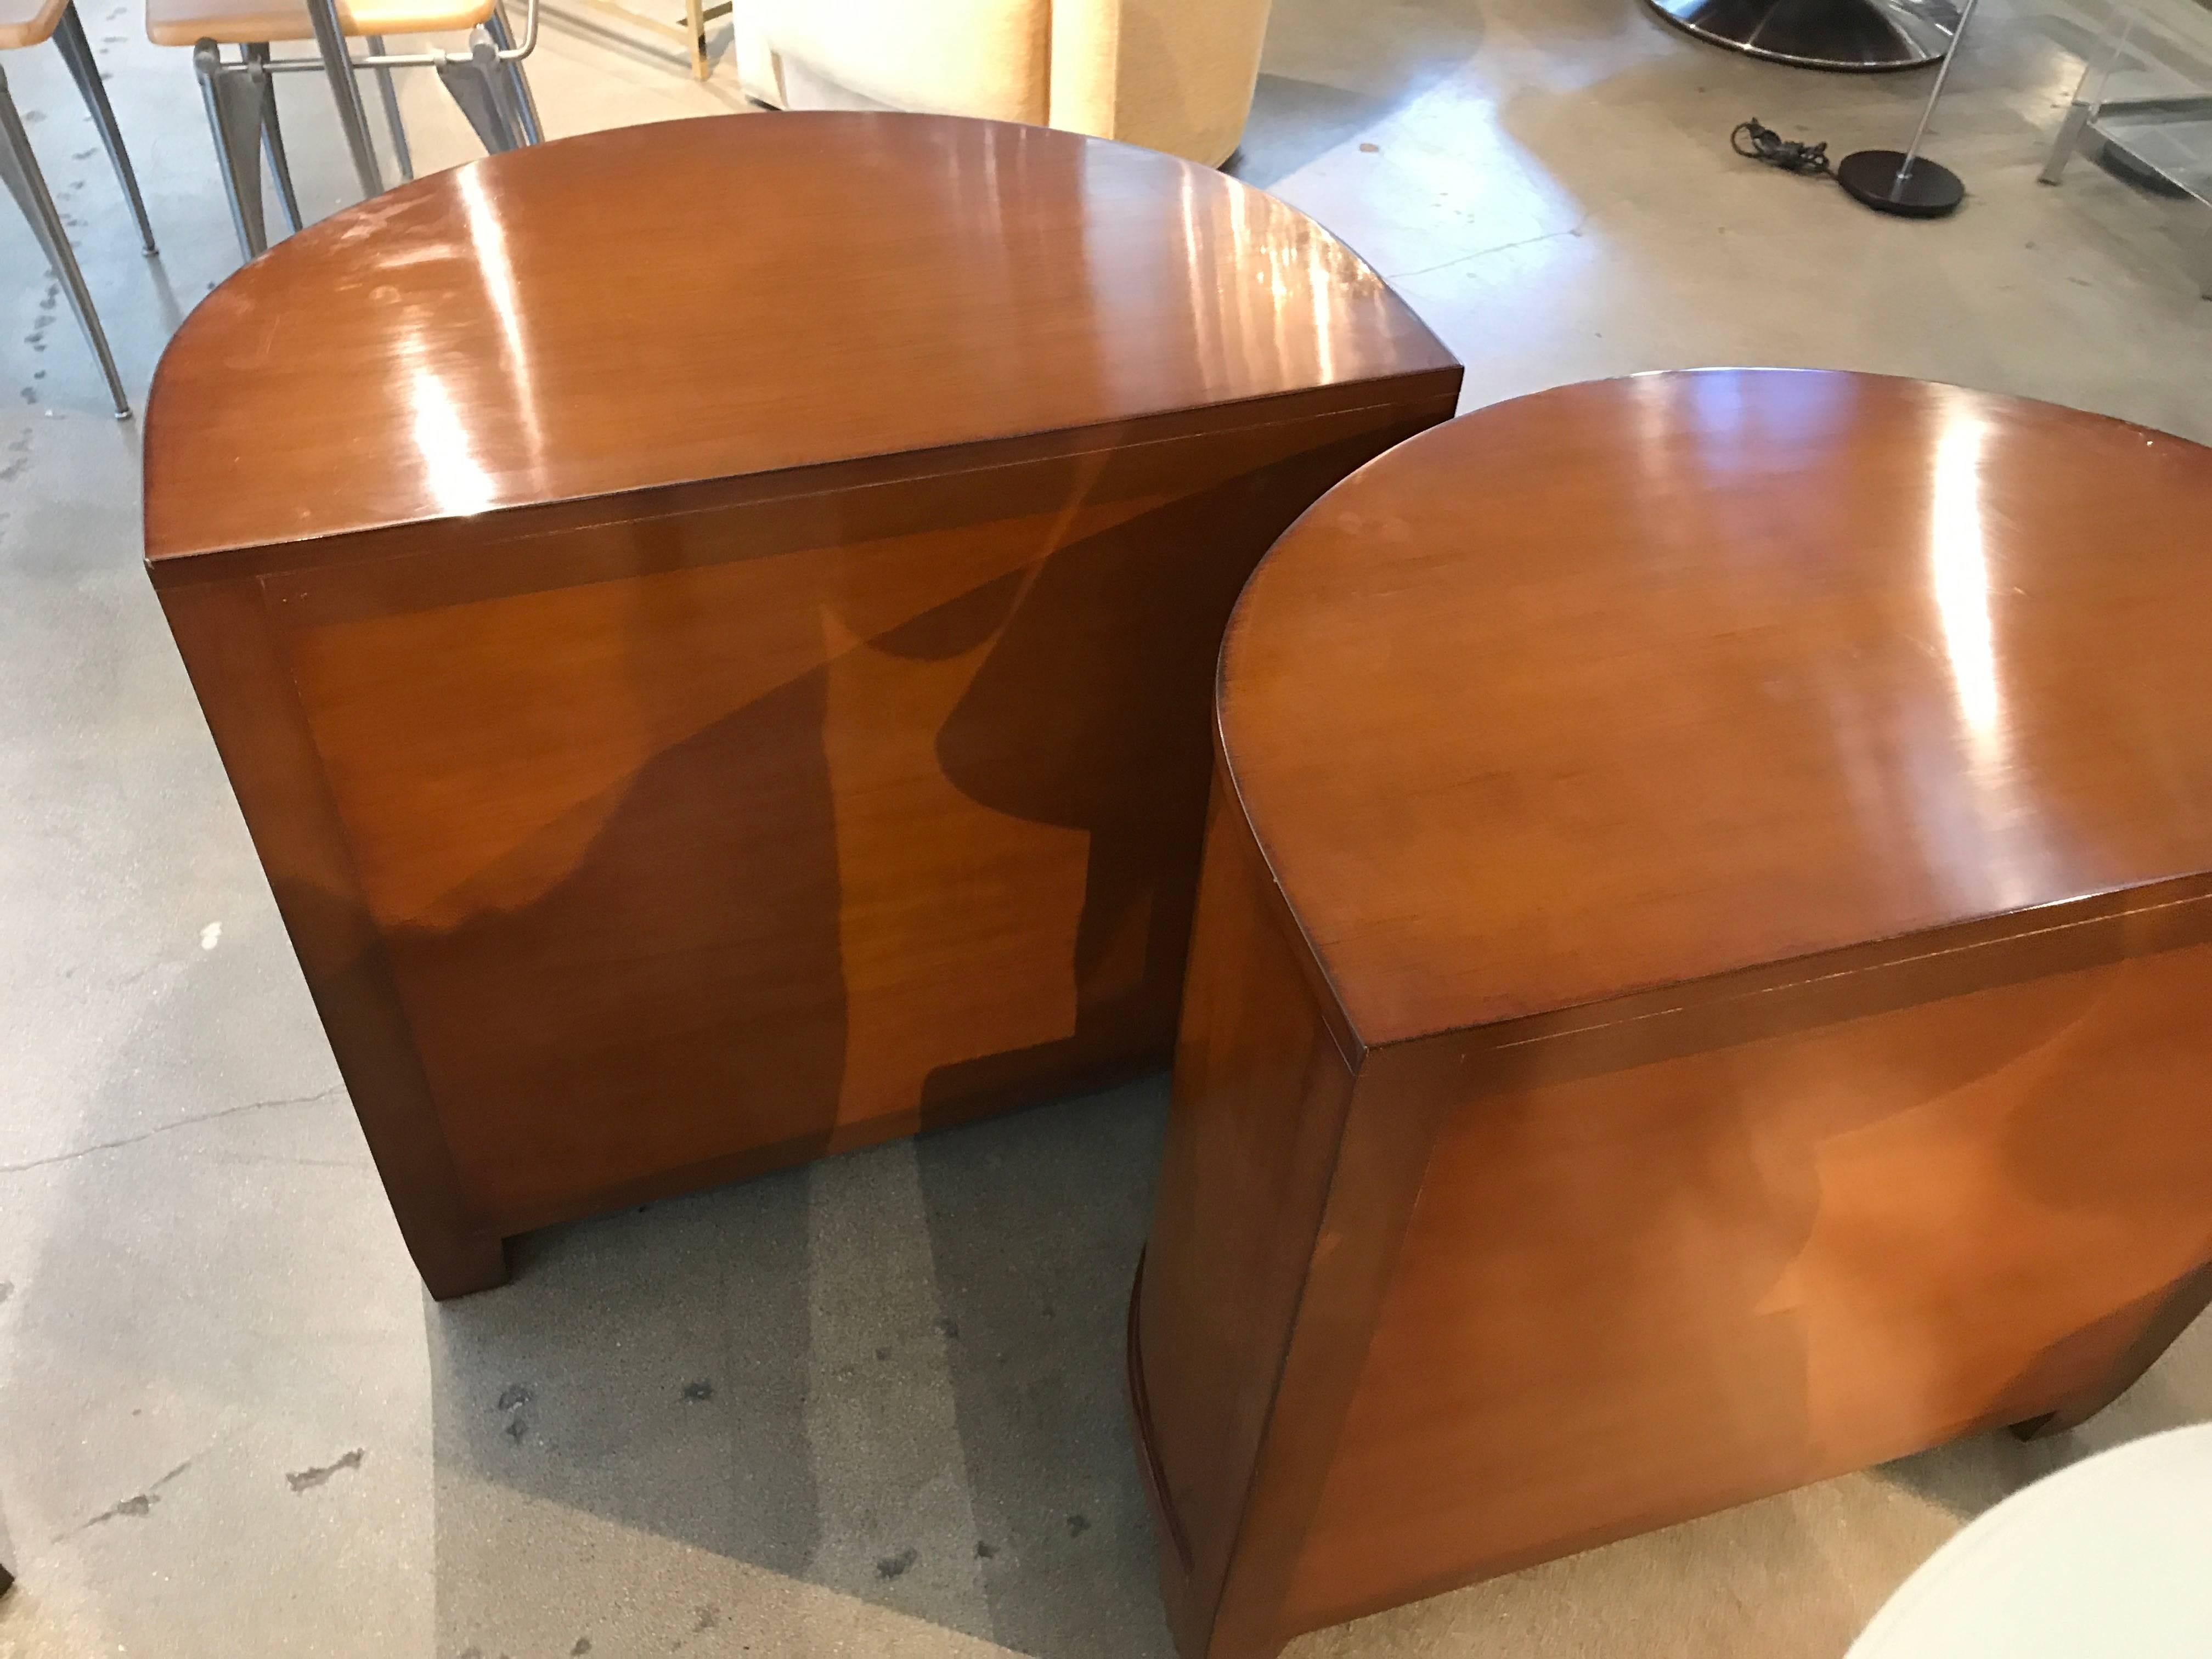 A nice pair of labelled Nancy Corzine demilune highly polished high quality end tables or nightstands. They feature interesting pulls. The drawers have the name marked on the inside. These tables are highly polished and were difficult to photograph.